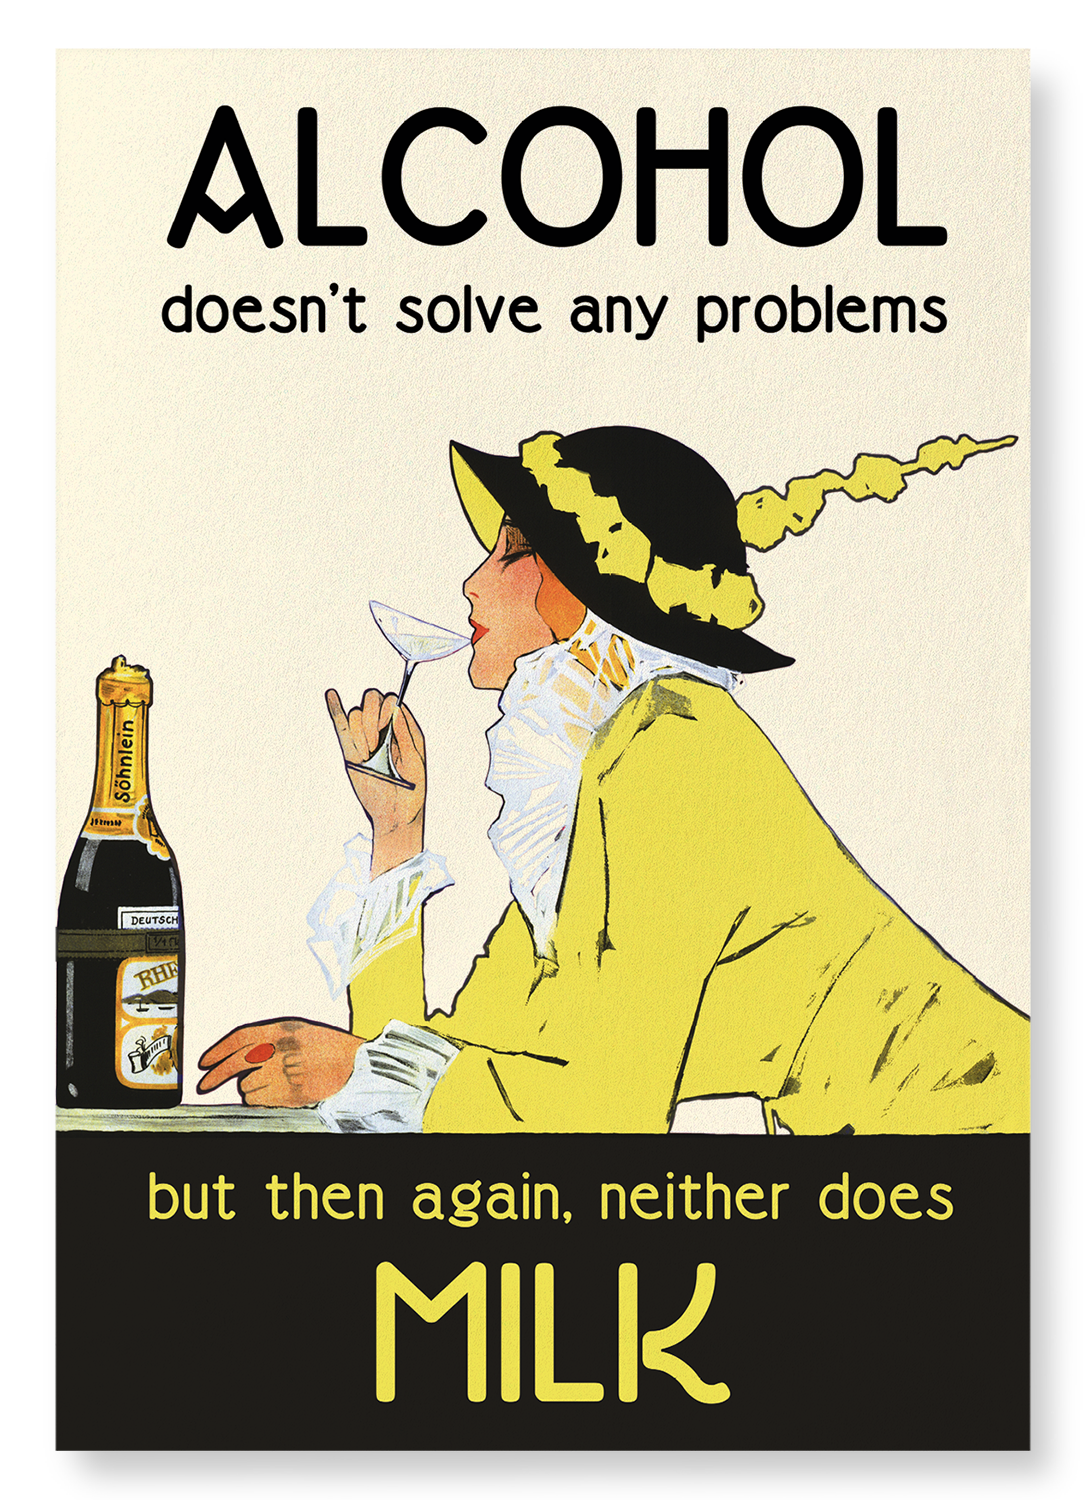 ALCOHOL AND PROBLEM SOLVING